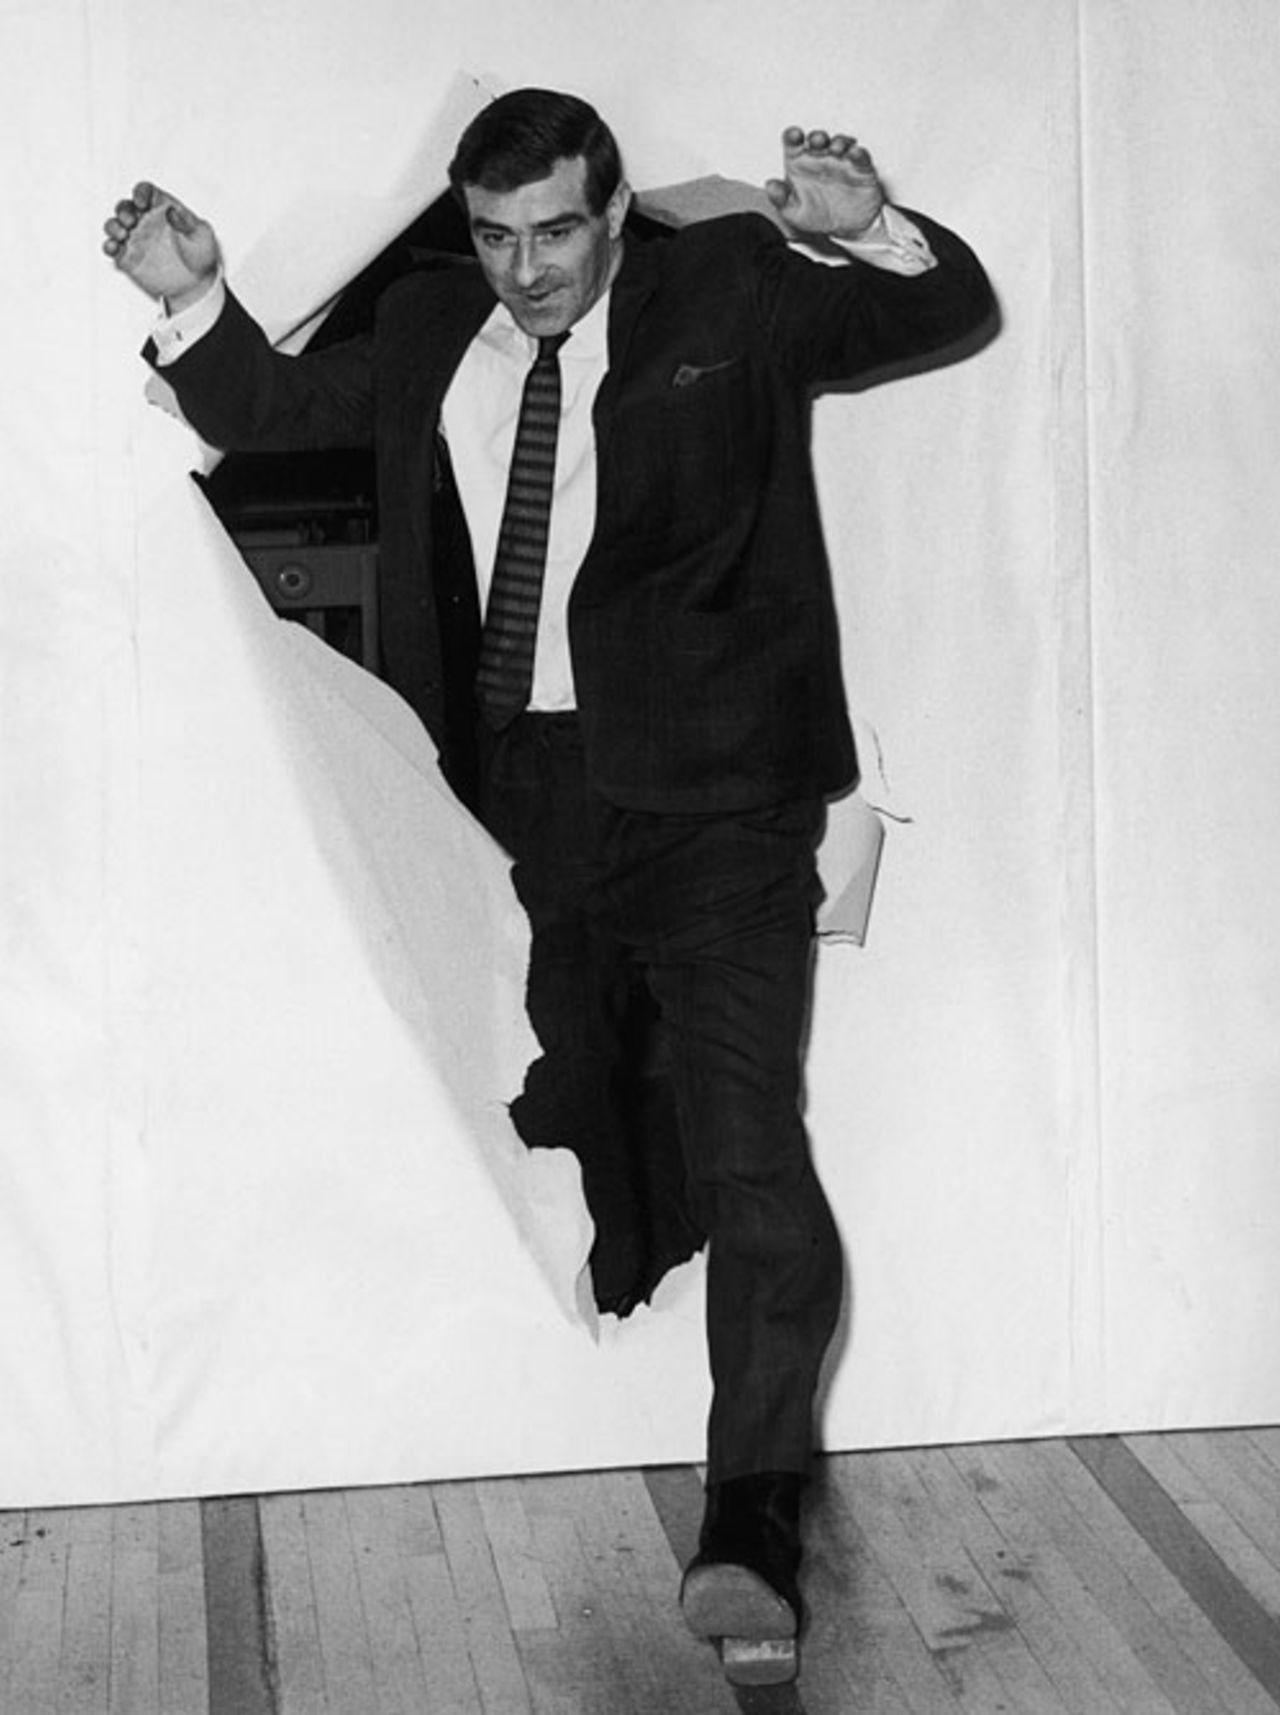 Fred Trueman makes his entrance during a stand-up comedy stint, Stockton-on-Tees, February 4, 1969